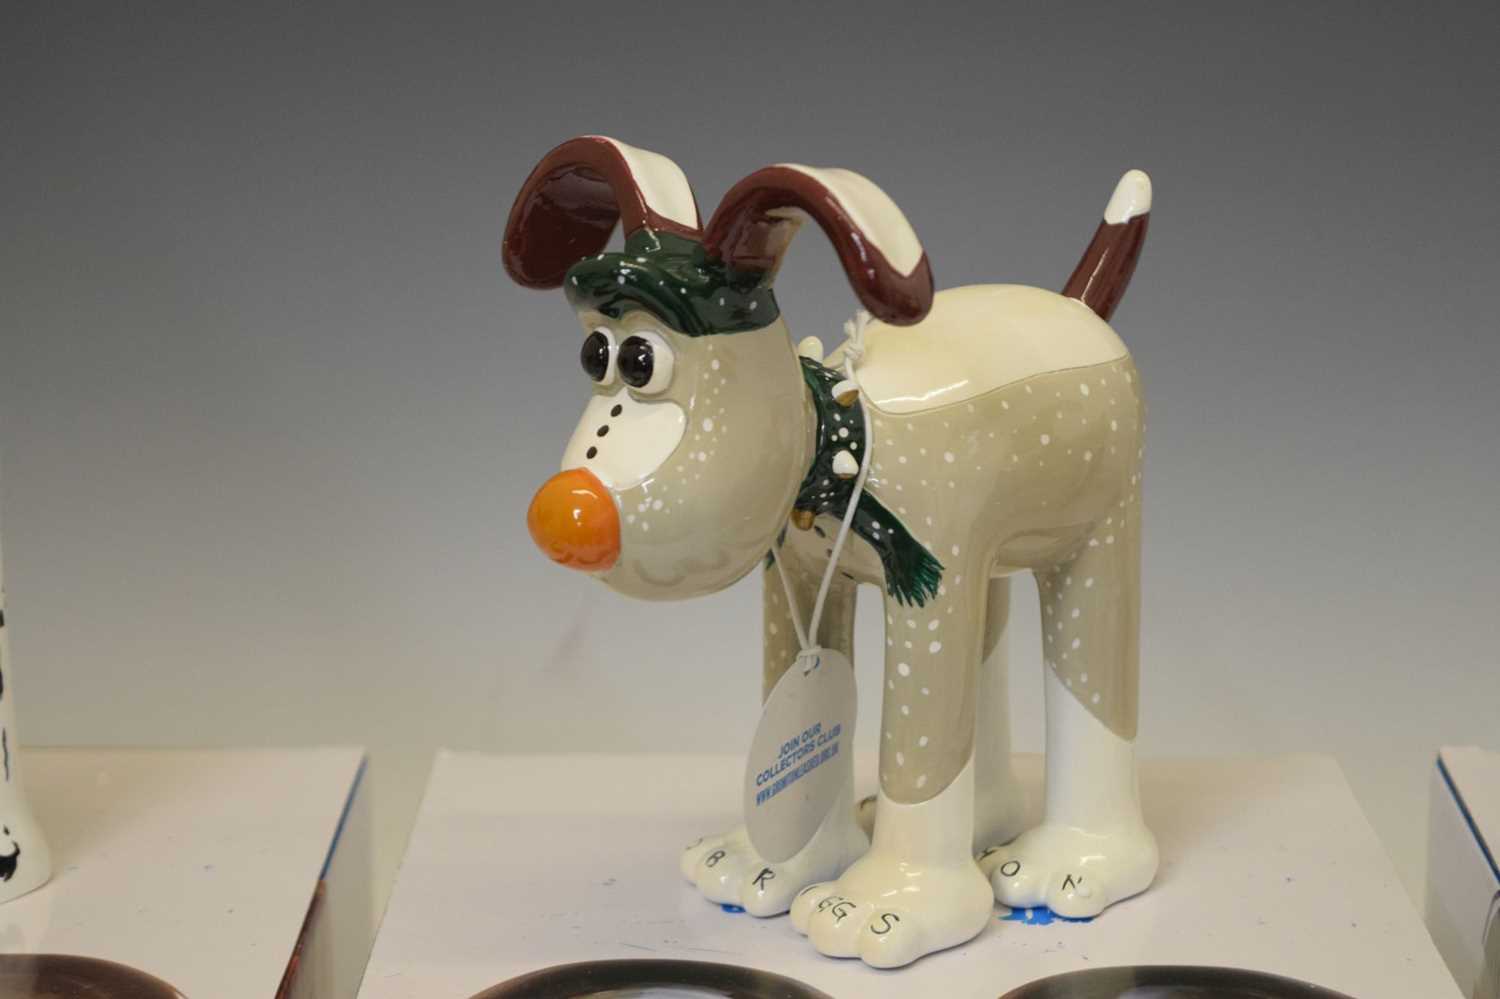 Aardman/Wallace and Gromit - 'Gromit Unleashed' figures - Image 5 of 11